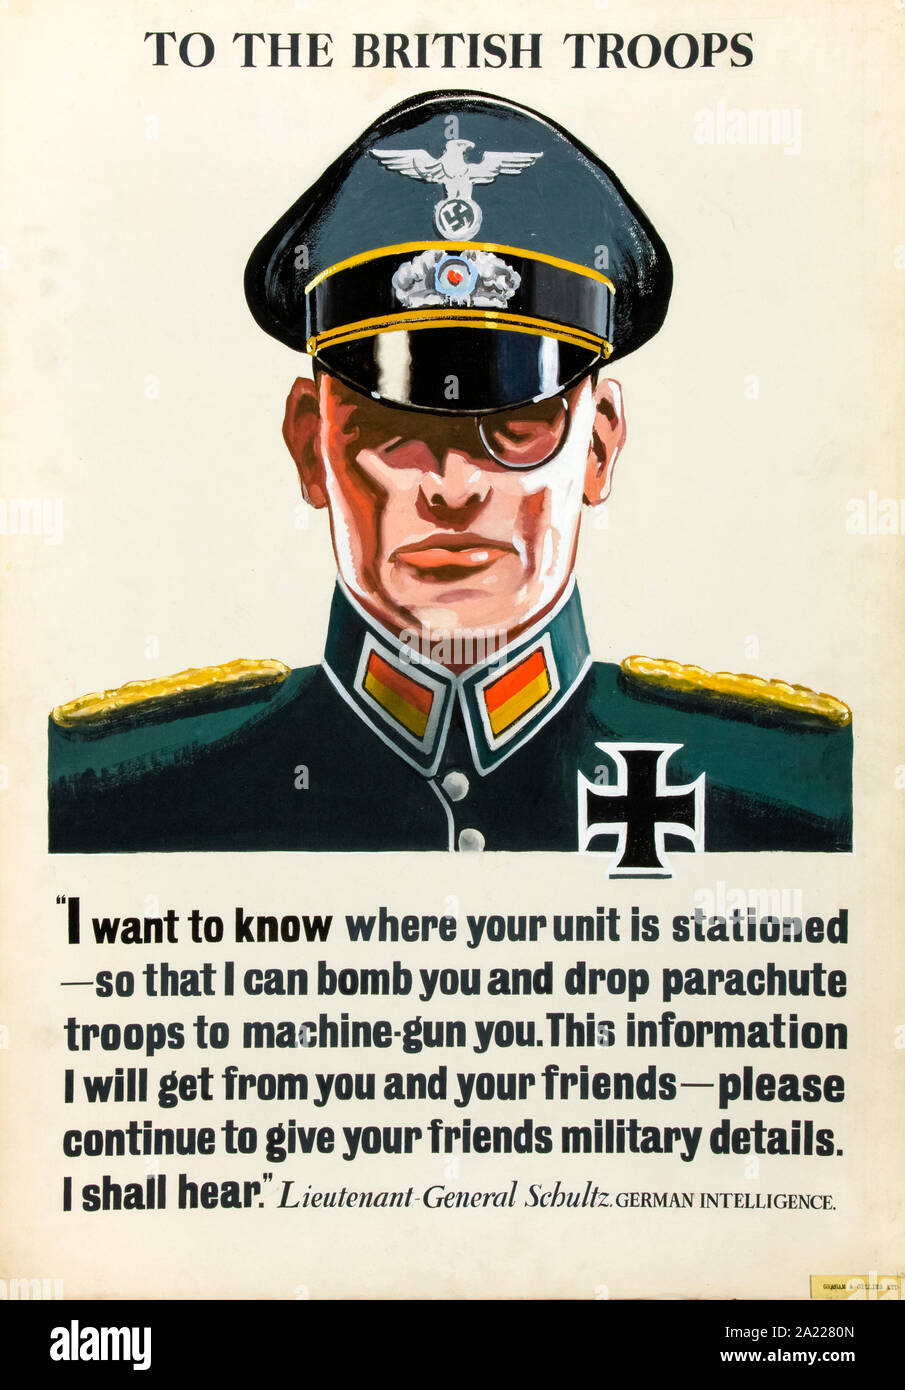 British, WW2, Careless talk, German Intelligence Officer with message to British troops on giving military details to friends, poster, 1939-1946 Stock Photo